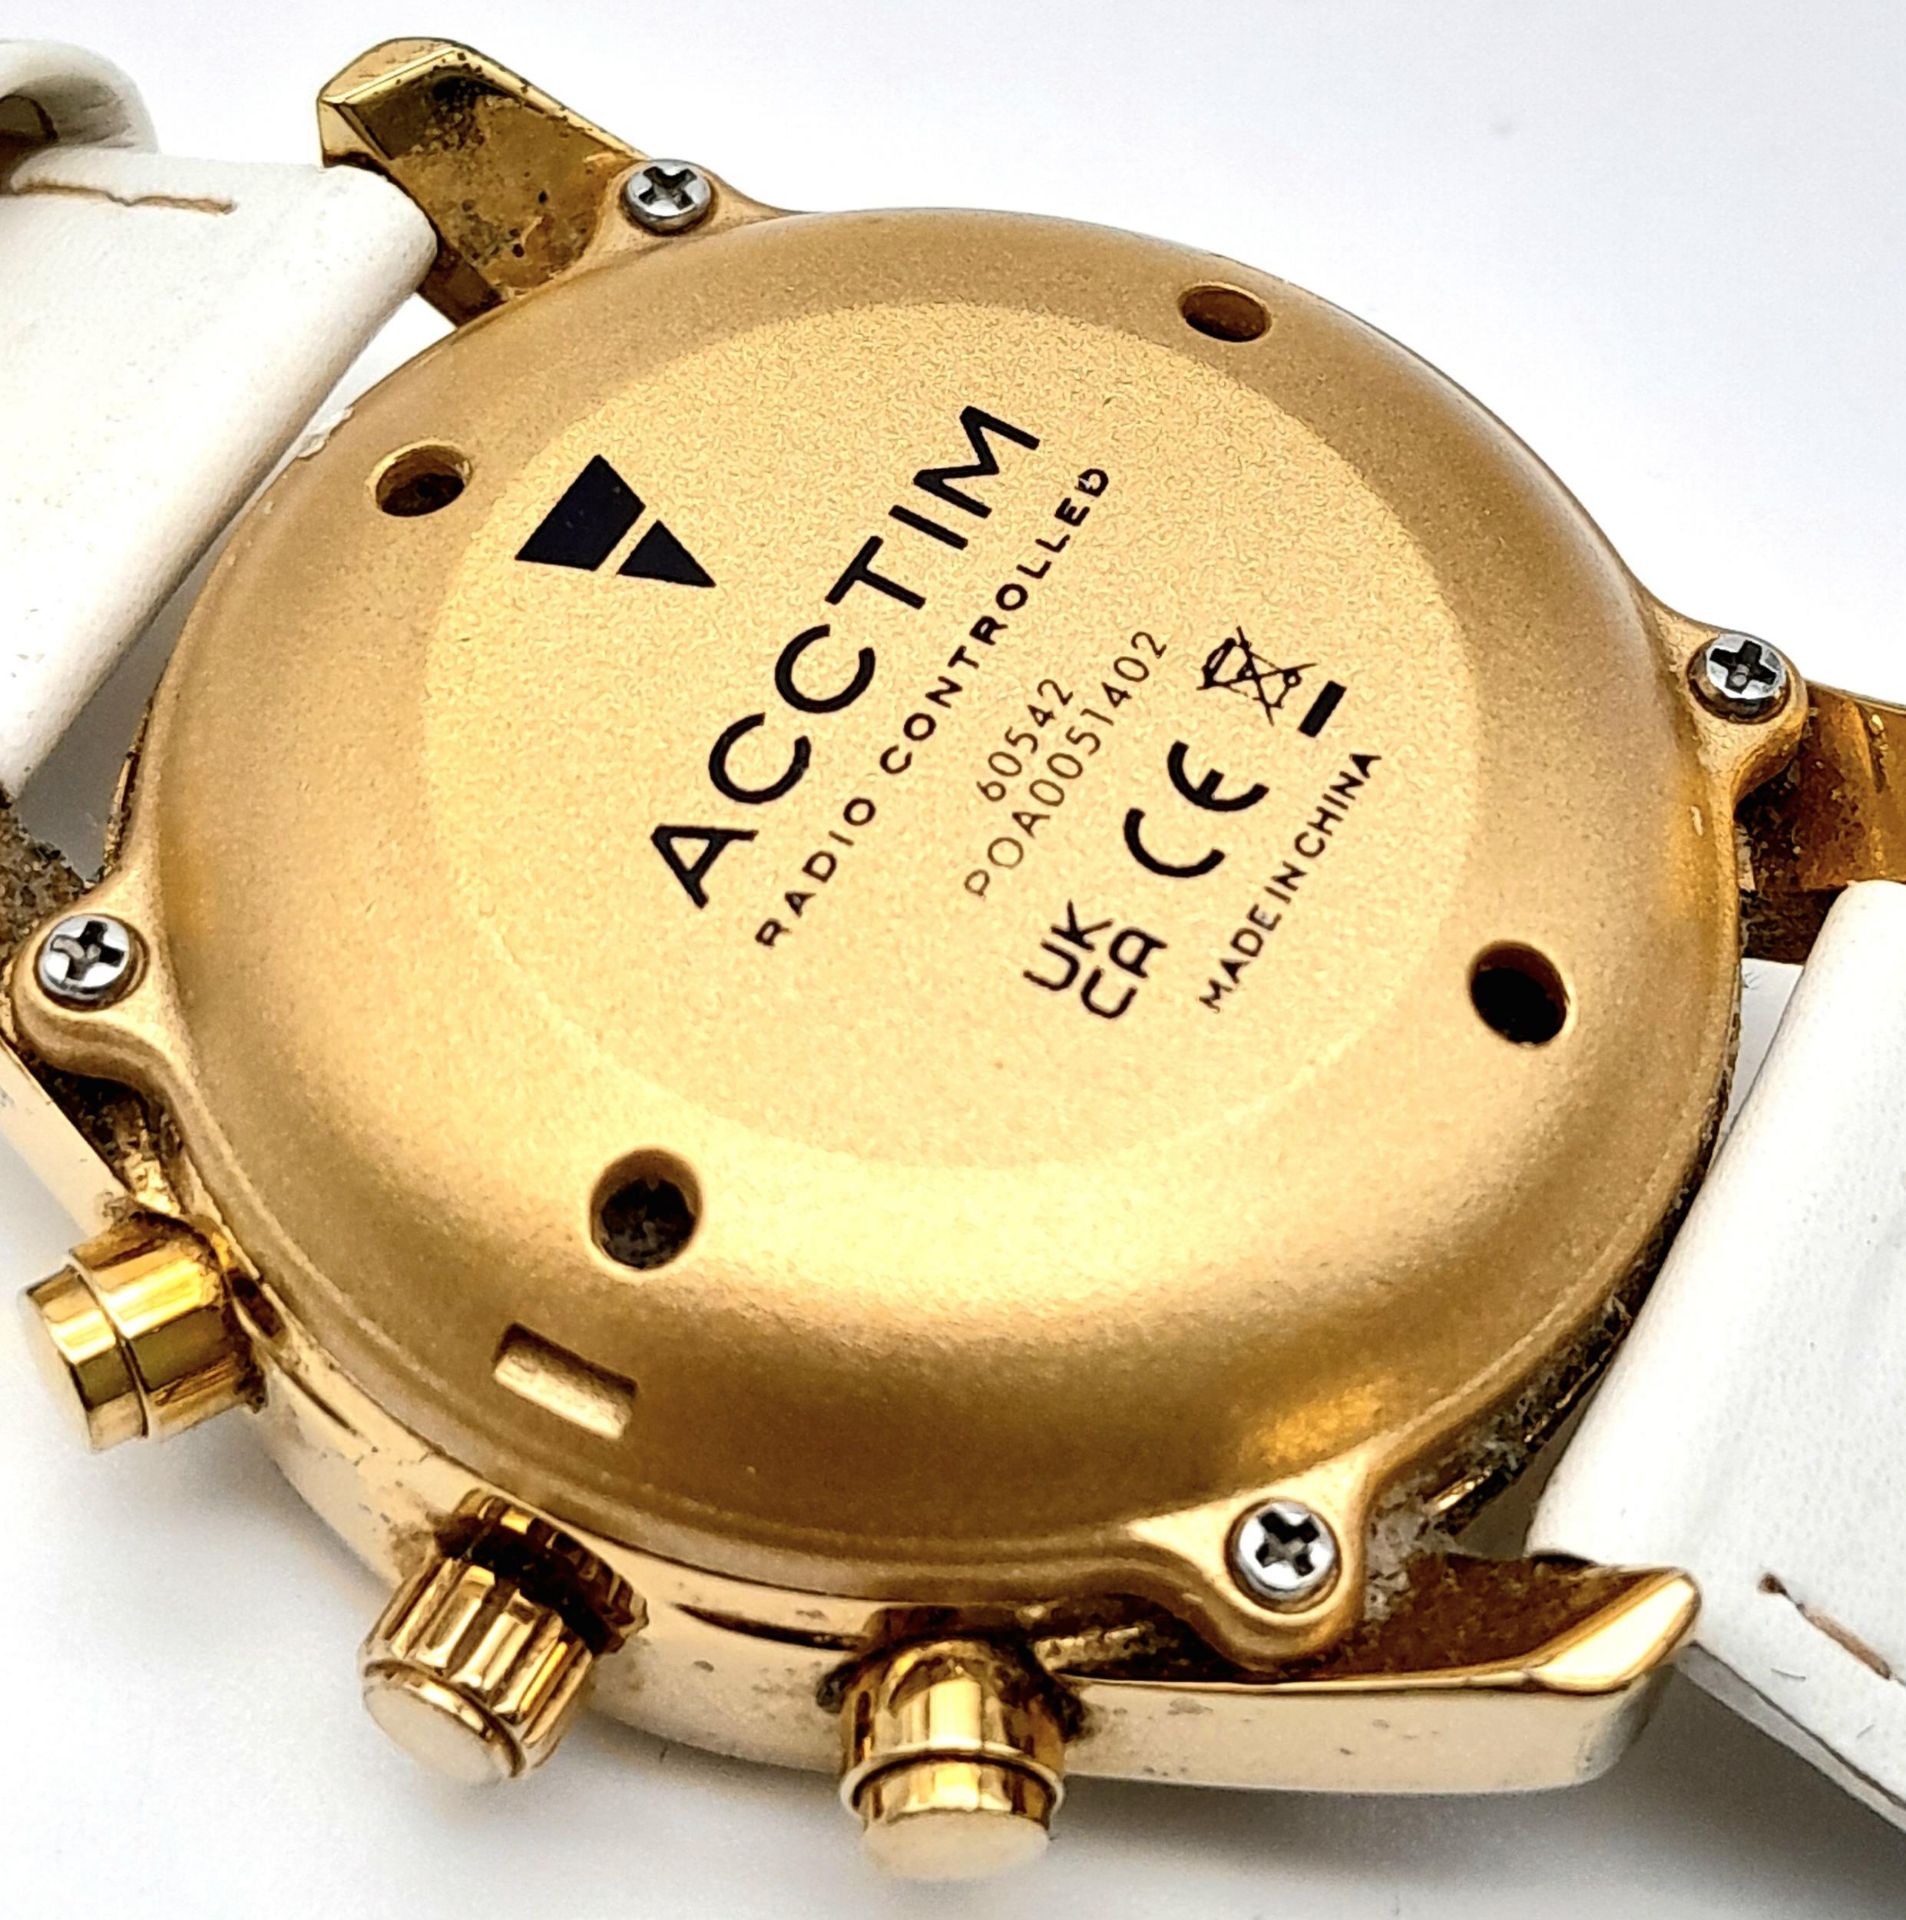 A Gold Tone, Radio Controlled Talking Watch by Acctim. Full Working Order, Very Good Condition. - Image 5 of 6